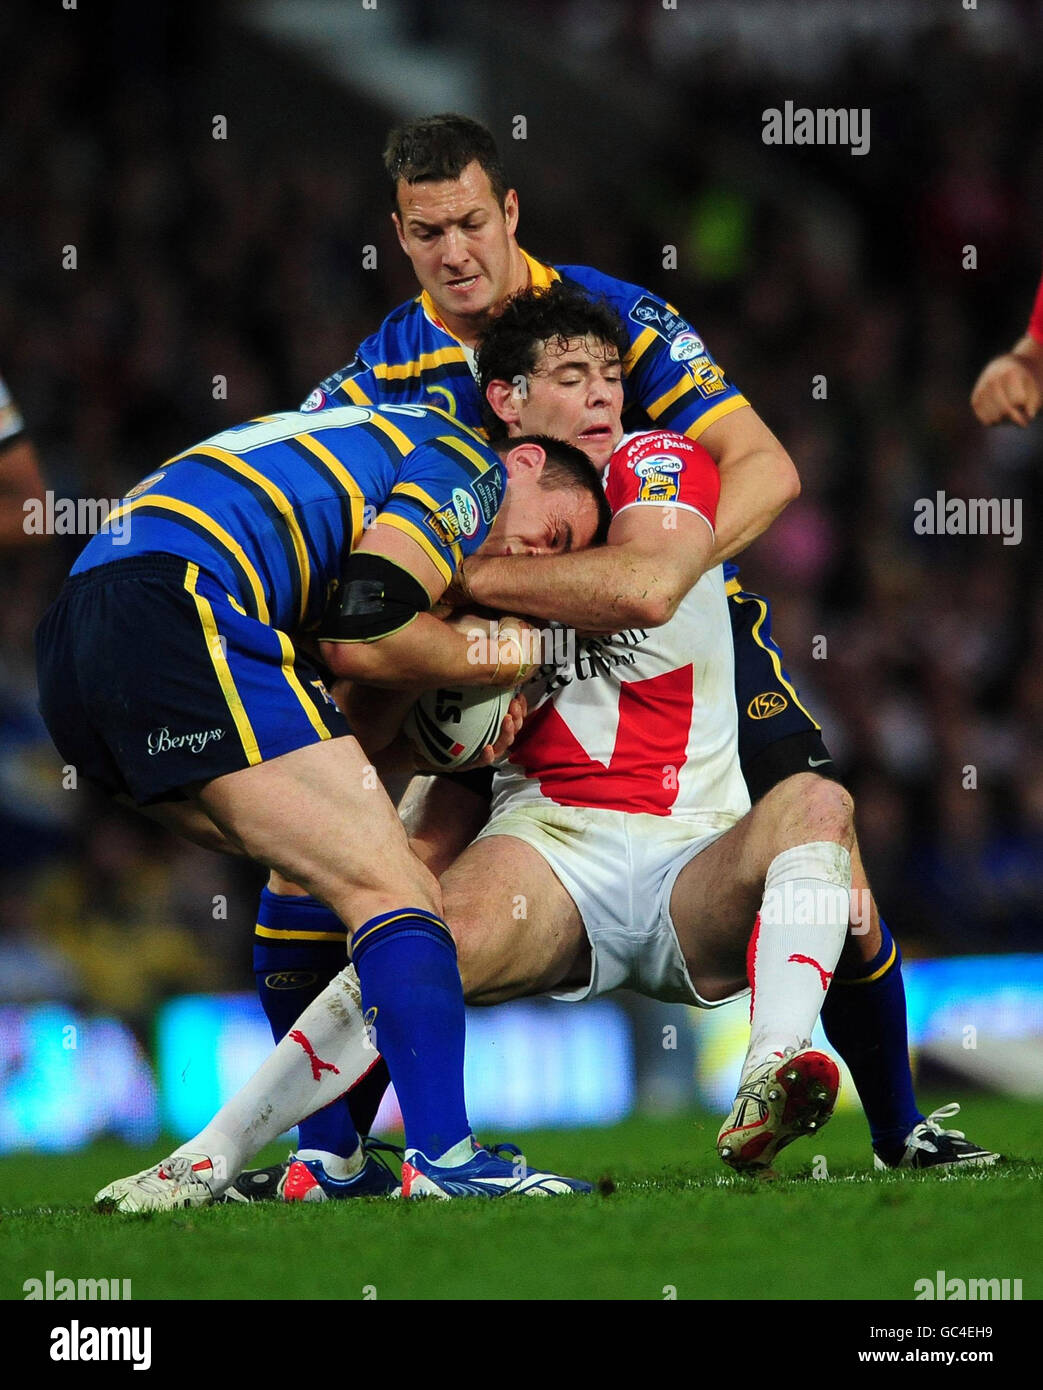 St Helens' Paul Wellens is tackled by Leeds Rhinos3 Kevin Sinfield and Danny Maguire during the Super League Grand Final match at Old Trafford, Manchester. Stock Photo